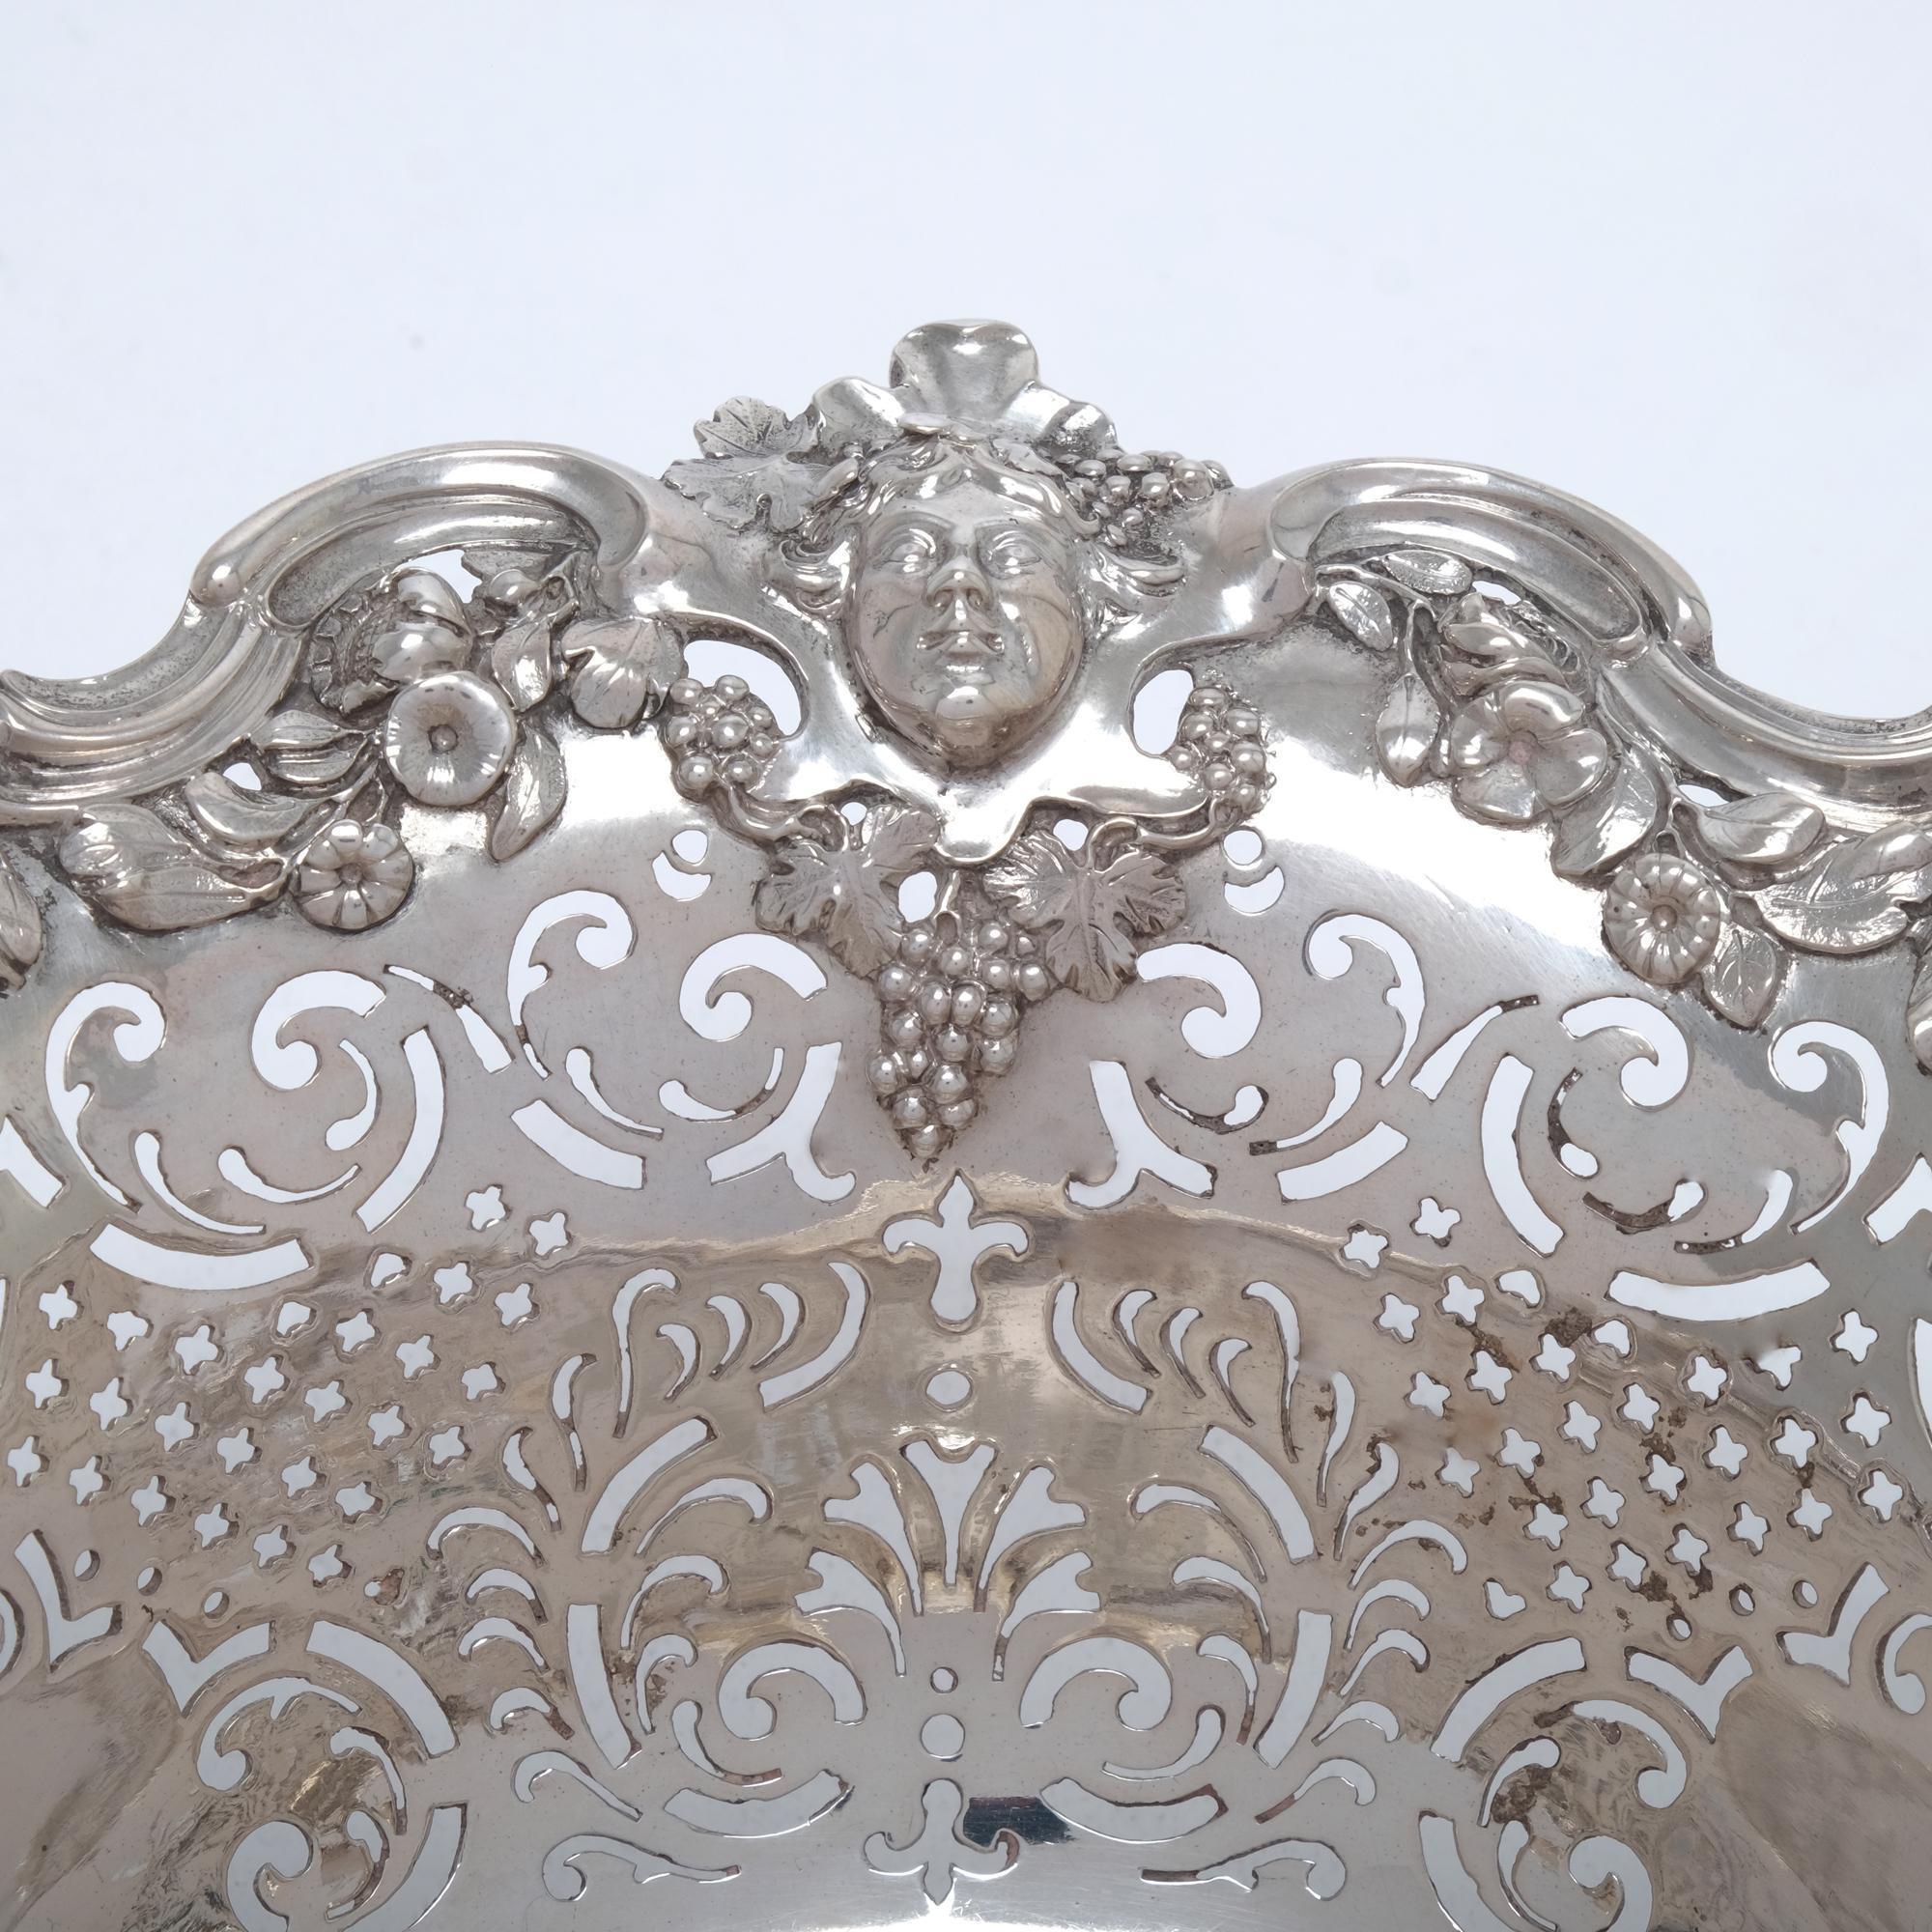 An absolutely wonderful example of the classic George II period (1727-1760) fruit basket with its finely detailed cast and applied mounts and hand-pierced sides illustrating all the elements that were popular at that time. The beautifully moulded